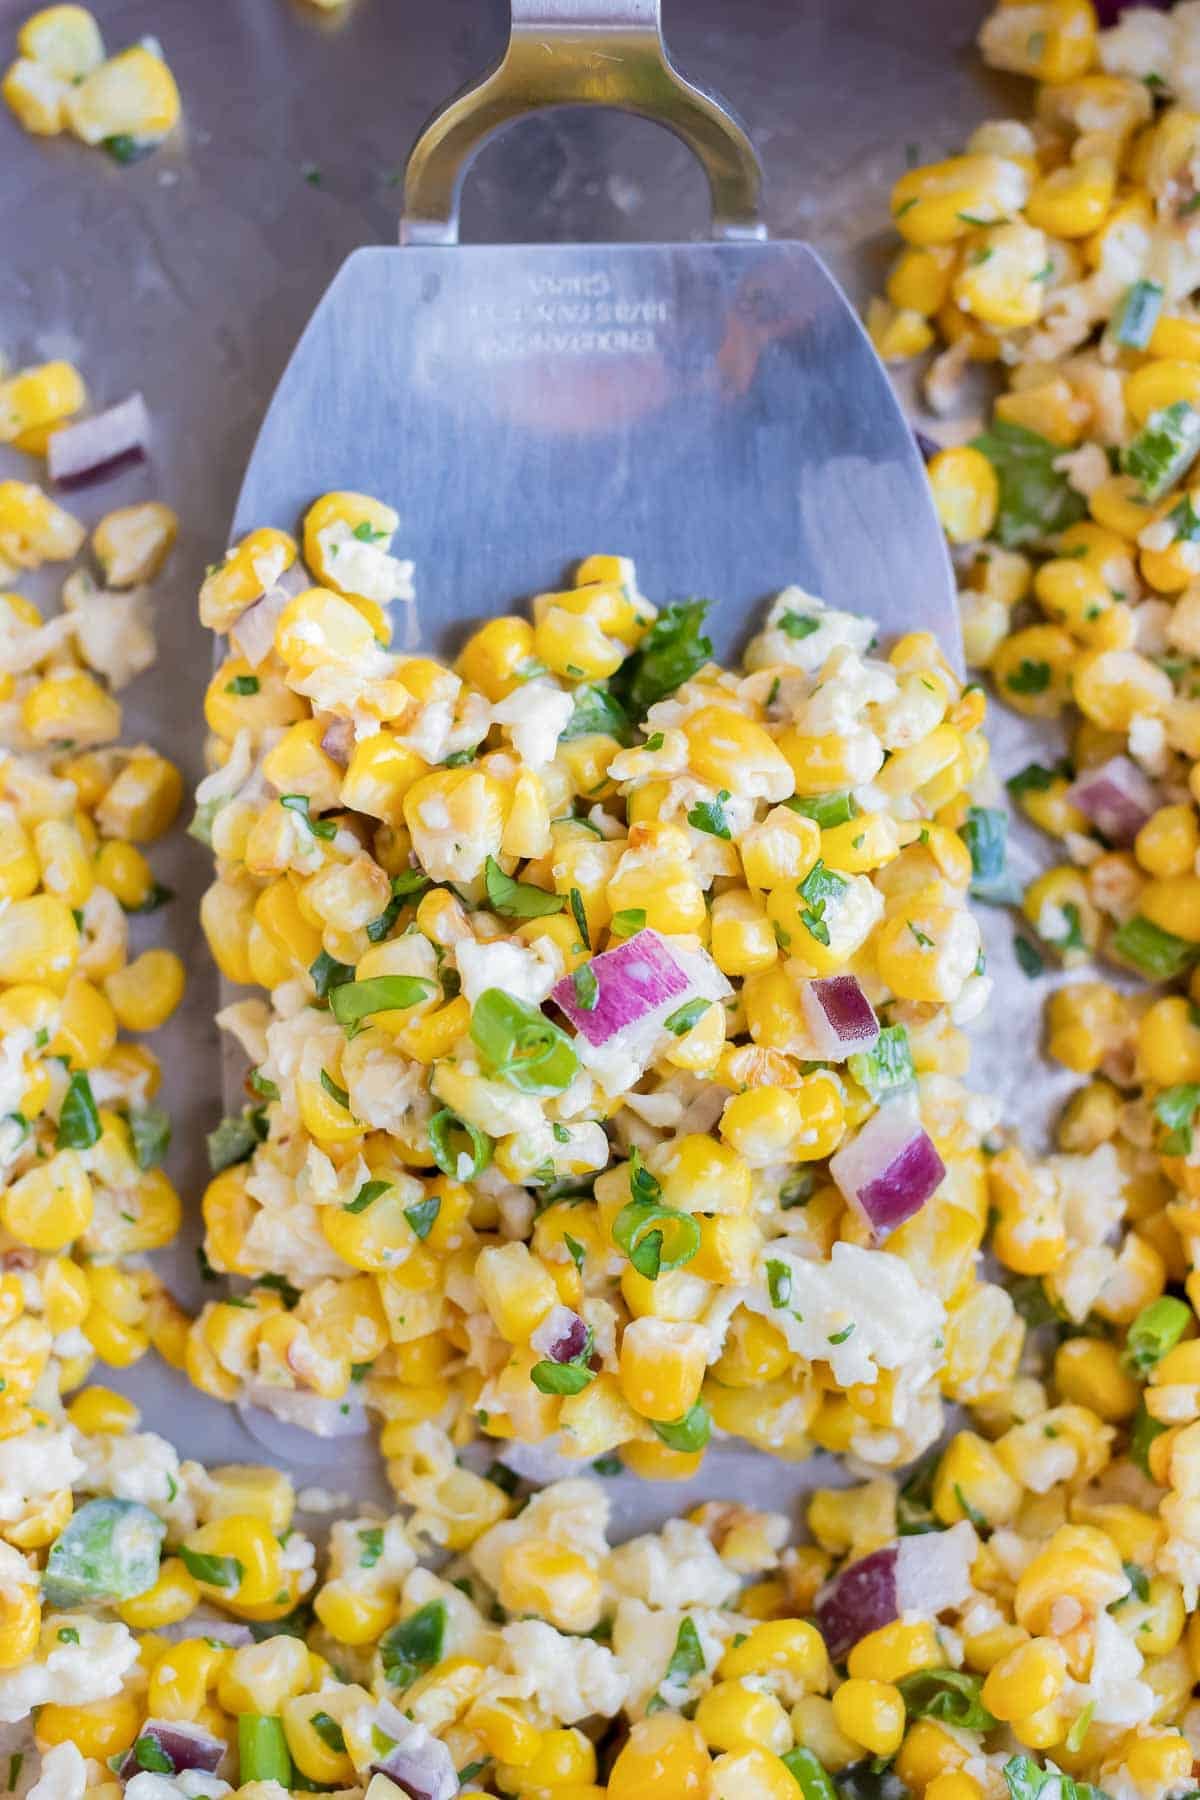 A stainless steel spatula scooping up a serving of a corn salad recipe as a side dish.